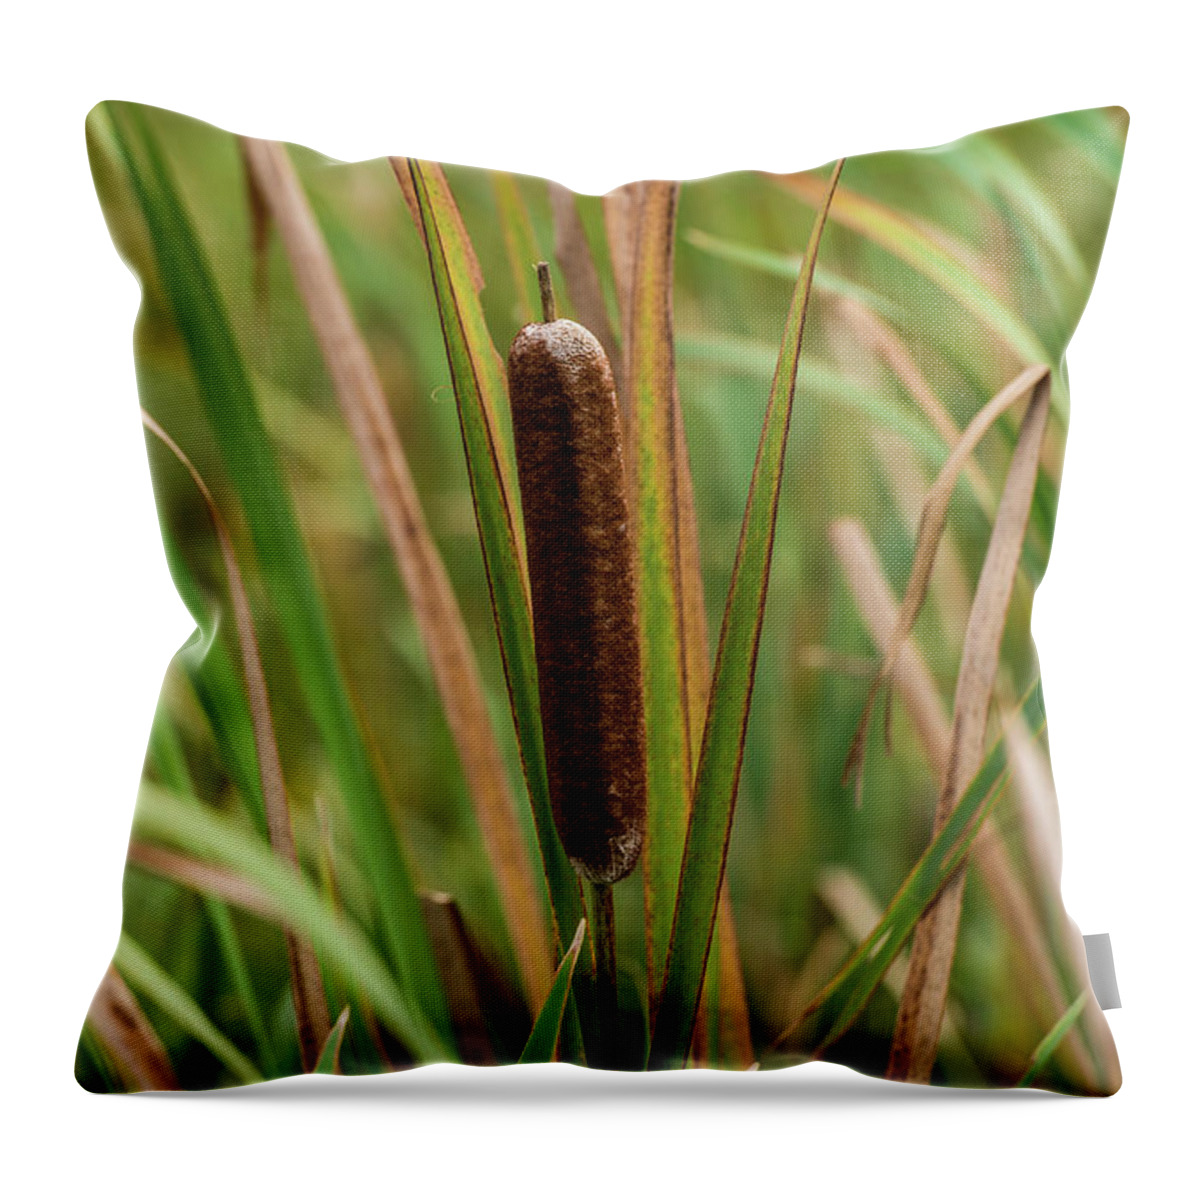 Botanical Throw Pillow featuring the photograph Cat Tail by Paul Freidlund